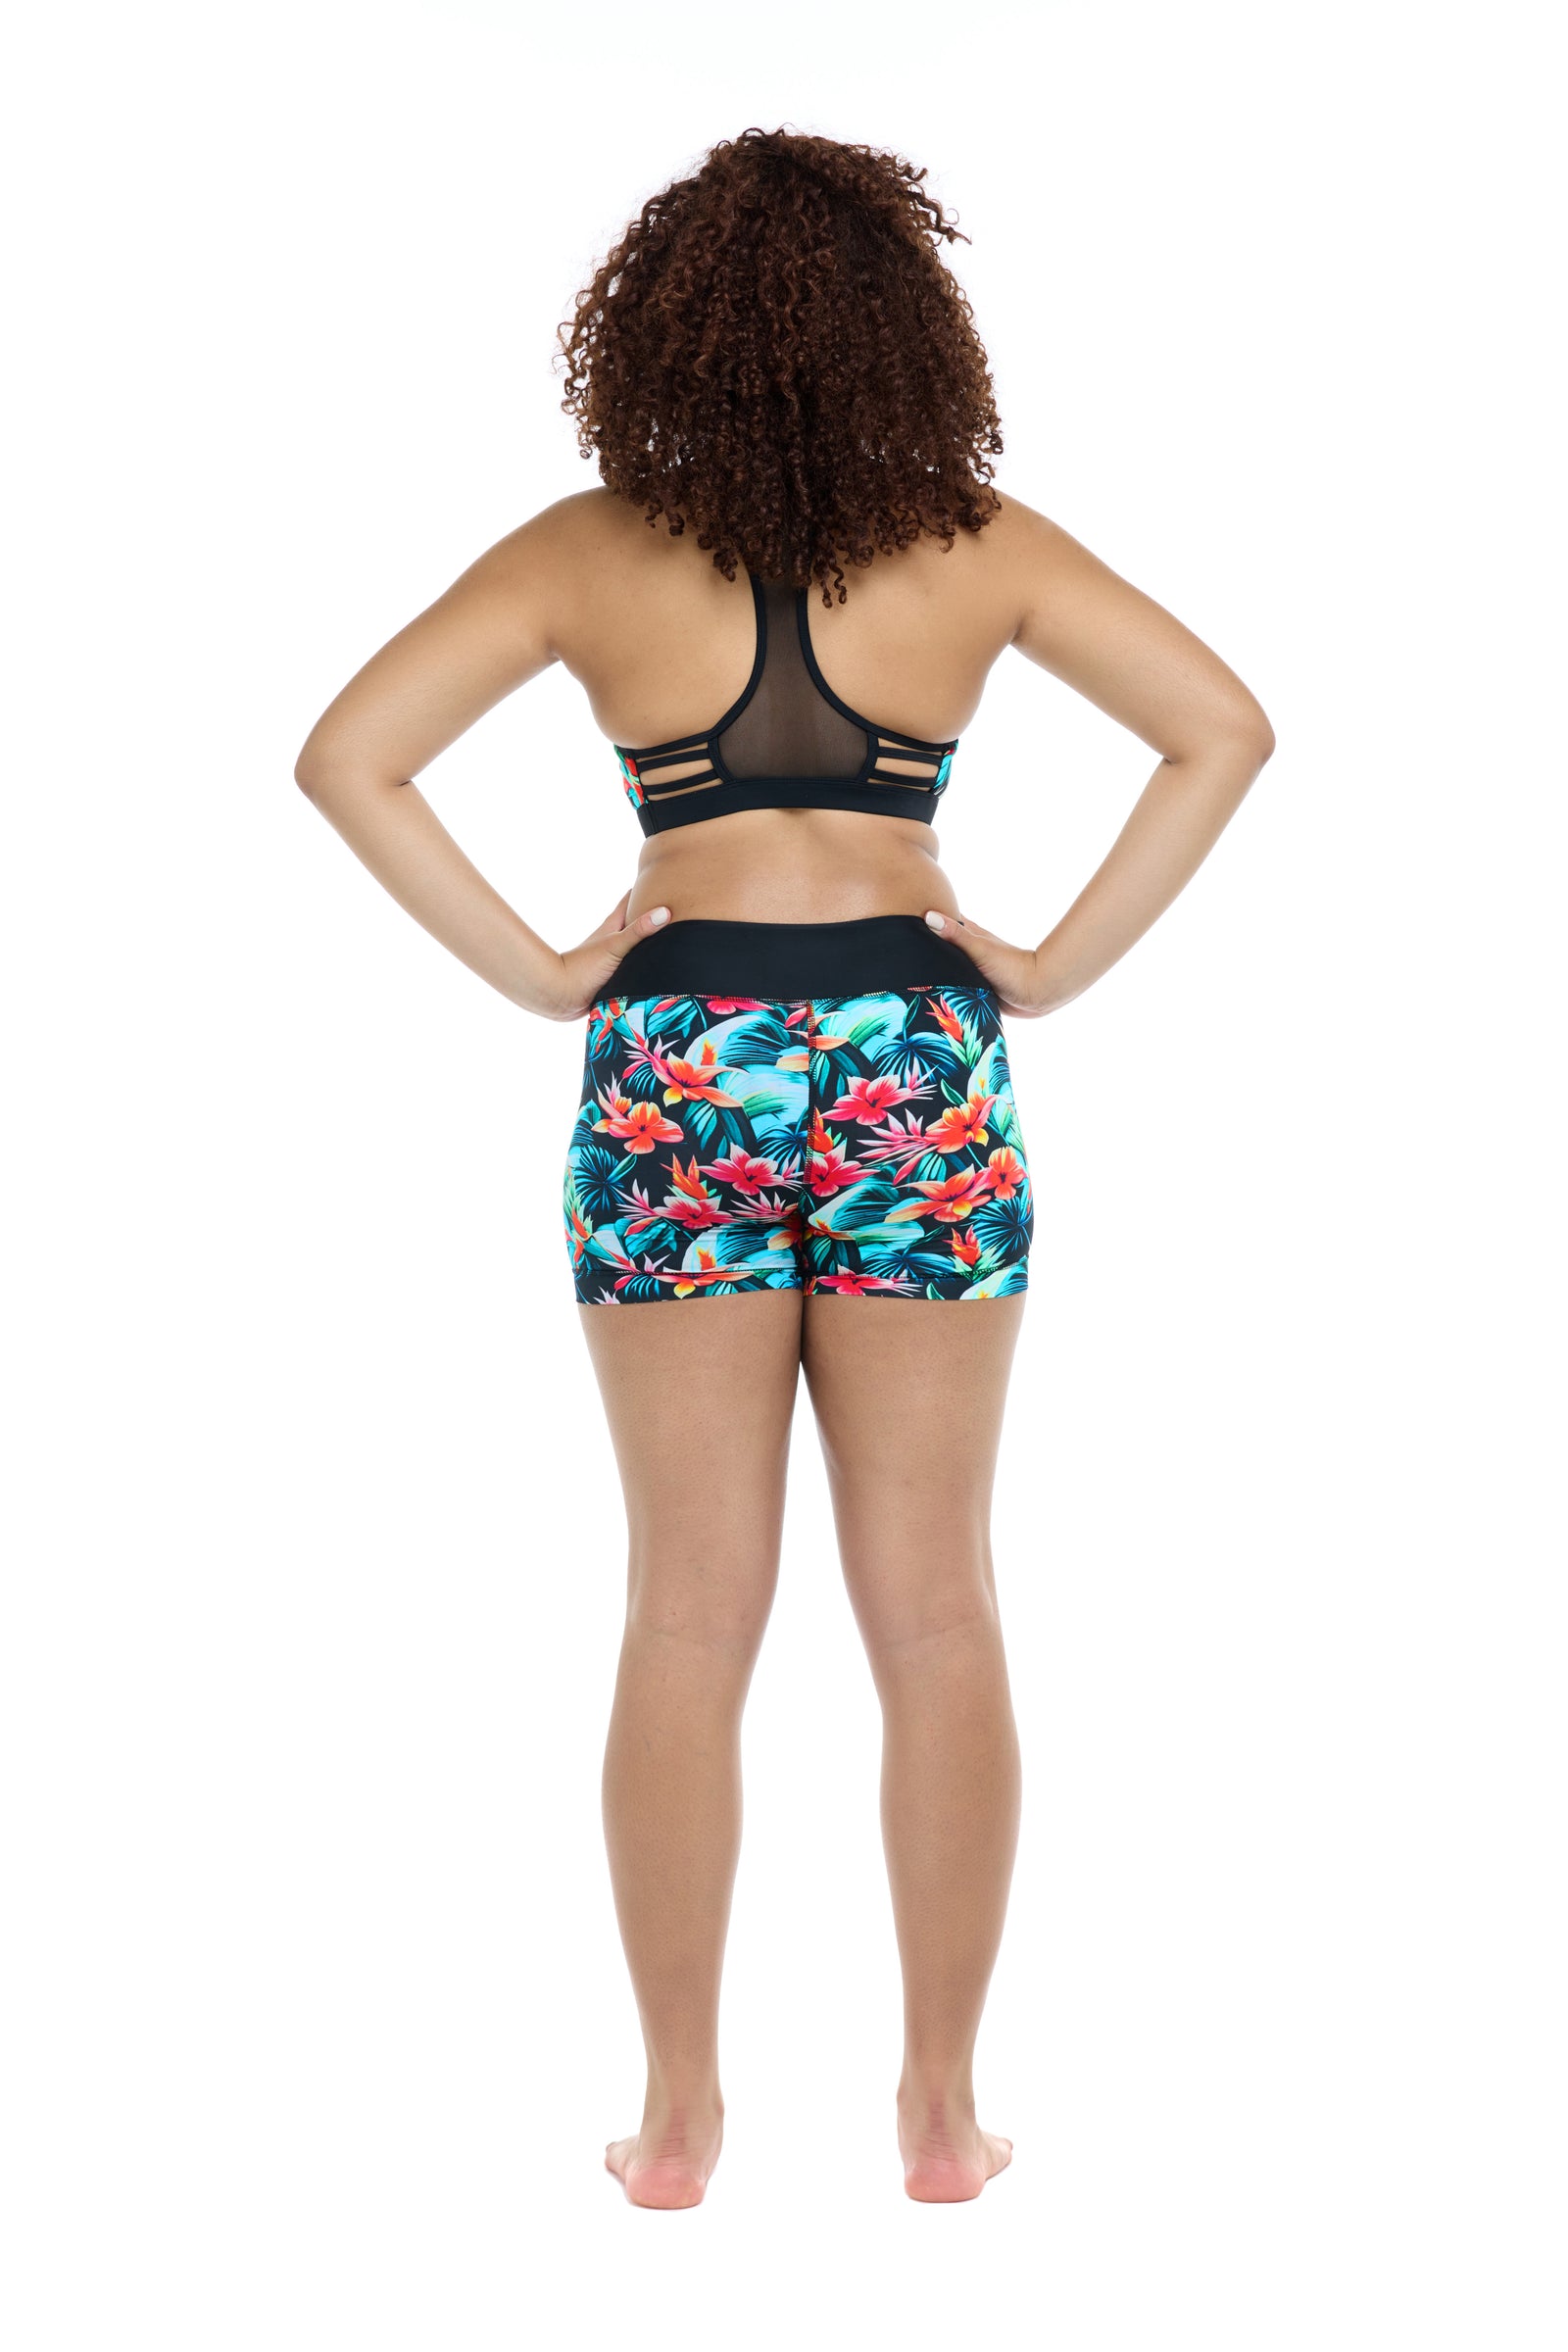 Body Glove Colola Speedy Short  Nylon/Spandex  Hand wash cold water Top and bottom sold separately Back View